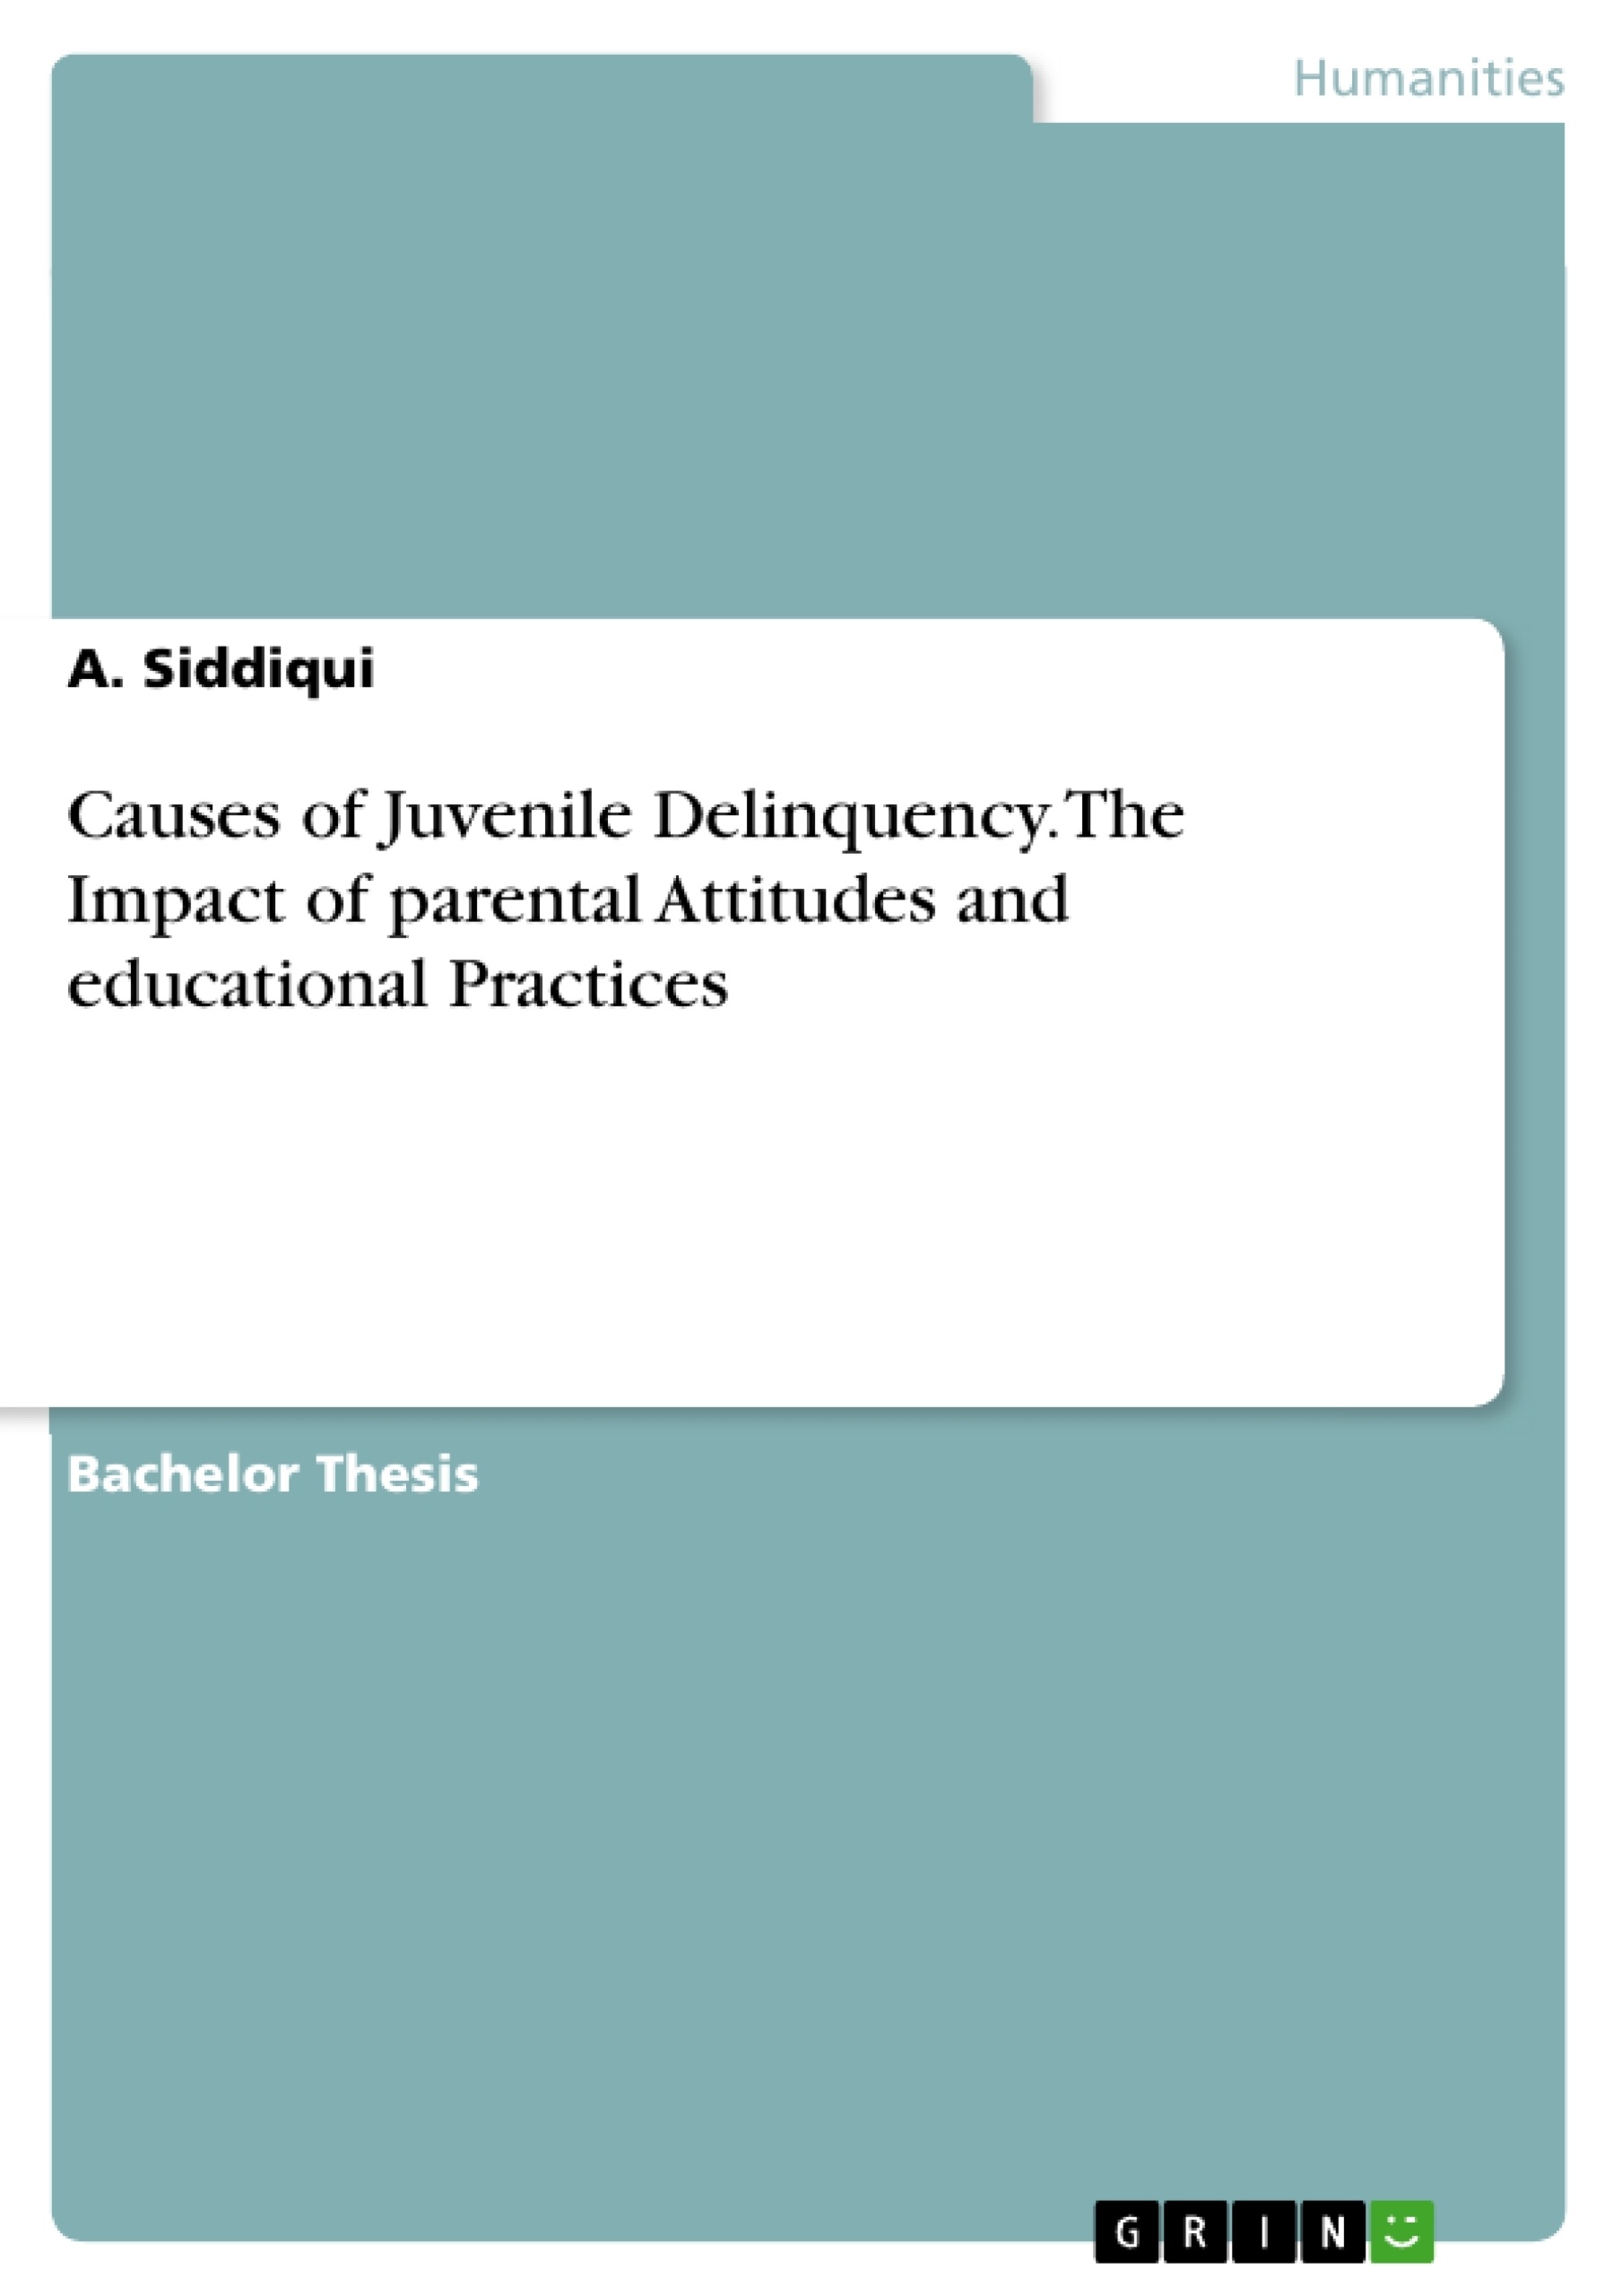 Title: Causes of Juvenile Delinquency. The Impact of parental Attitudes and educational Practices